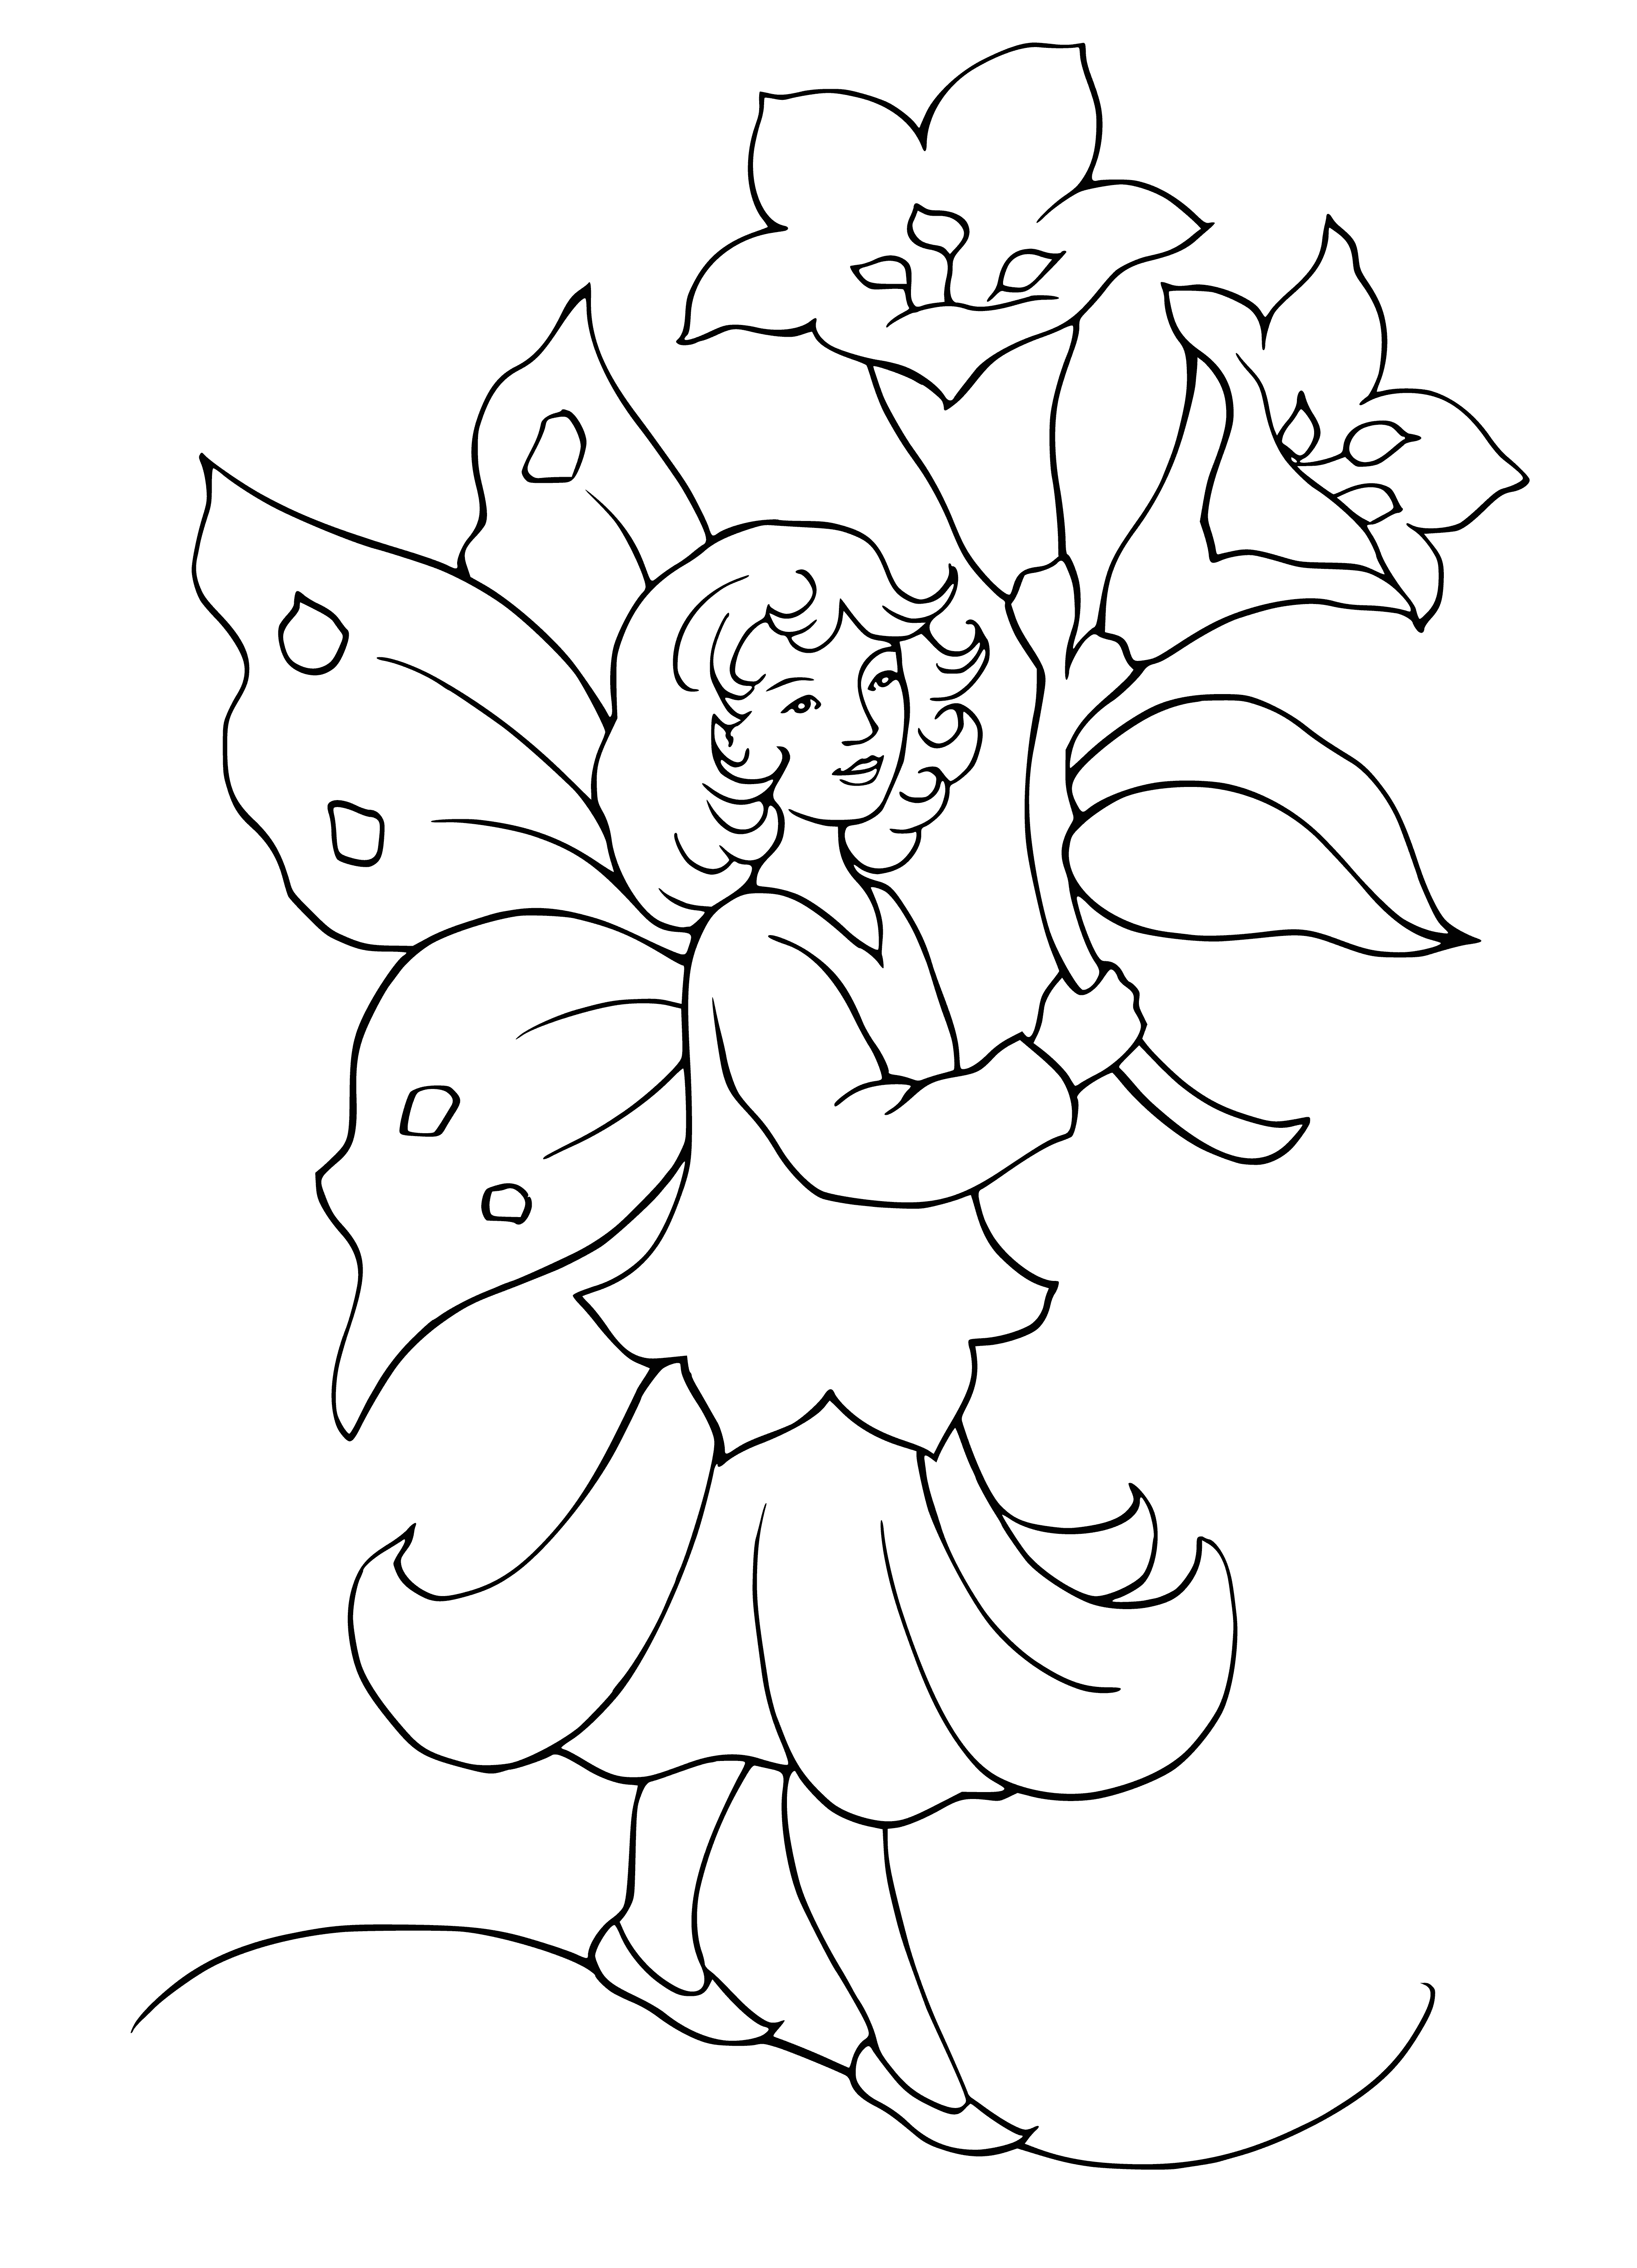 coloring page: Girl in white dress with wings surrounded by sparkly fairies or elves, admiring her.